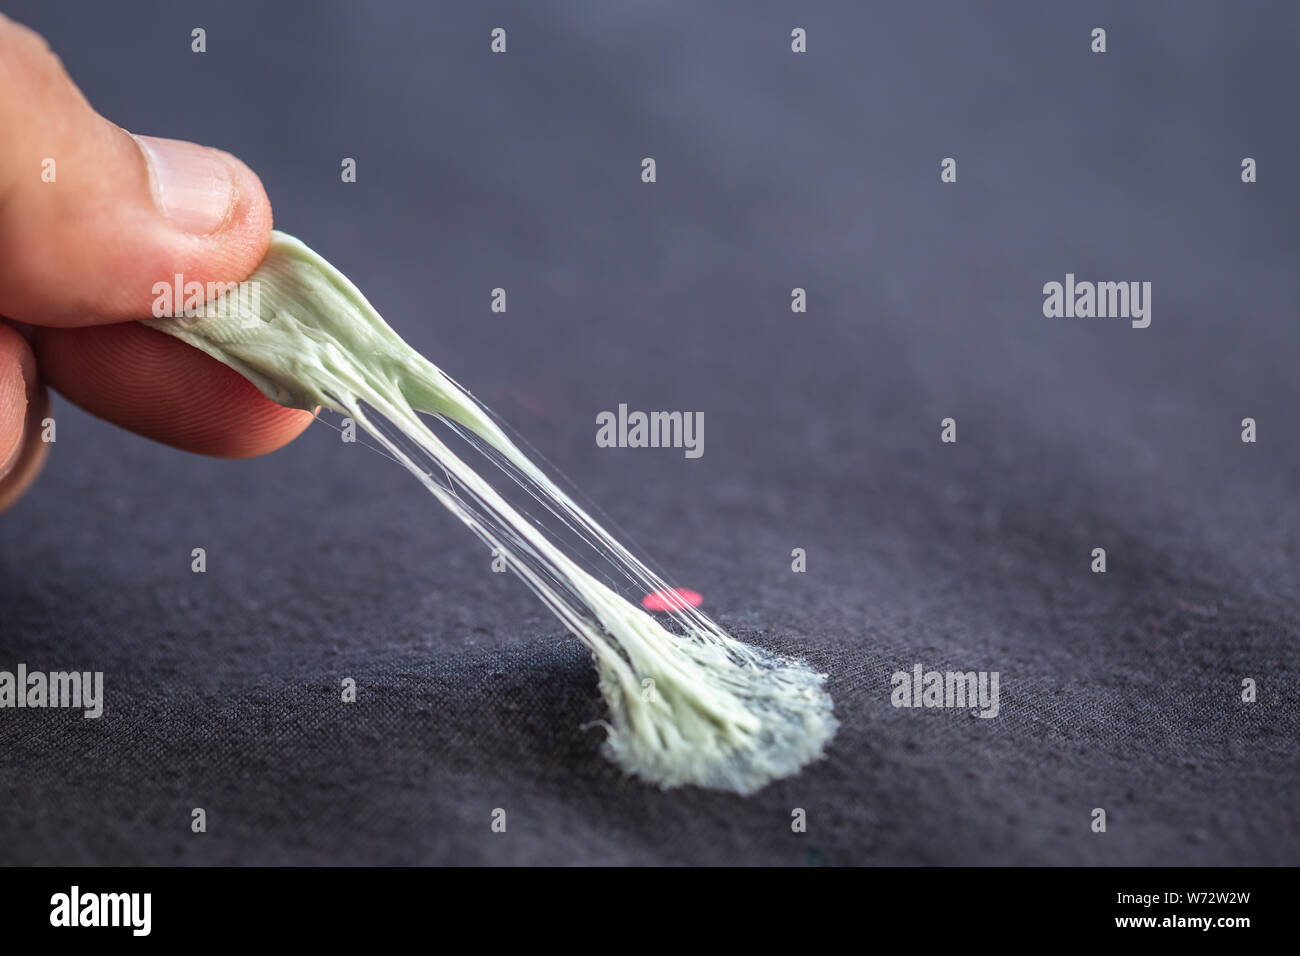 Close up hand removing sticky chewing gum from black textile or clothes Stock Photo